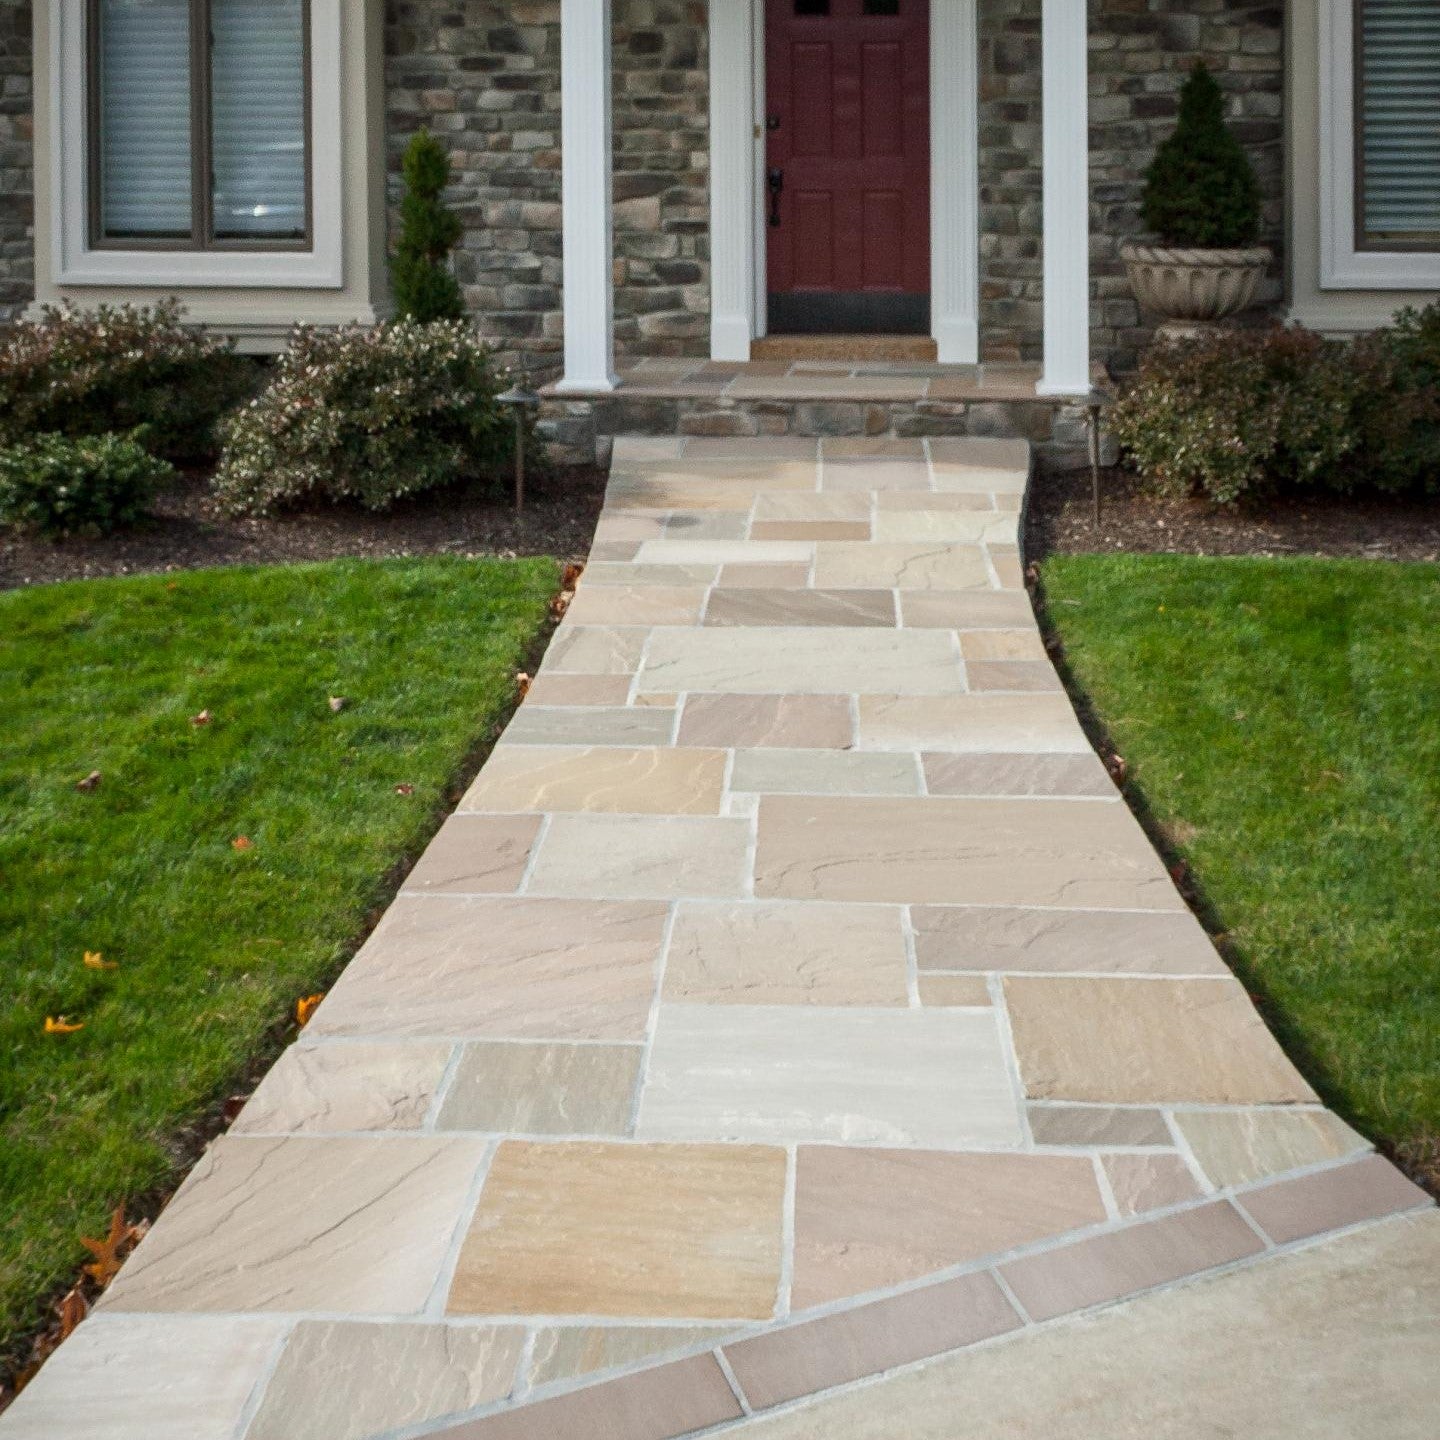 ArtisanCut Series Flagstone showcasing meticulously cut edges and natural cleft tops, perfect for achieving a harmonious balance of precision and natural beauty in outdoor paving.